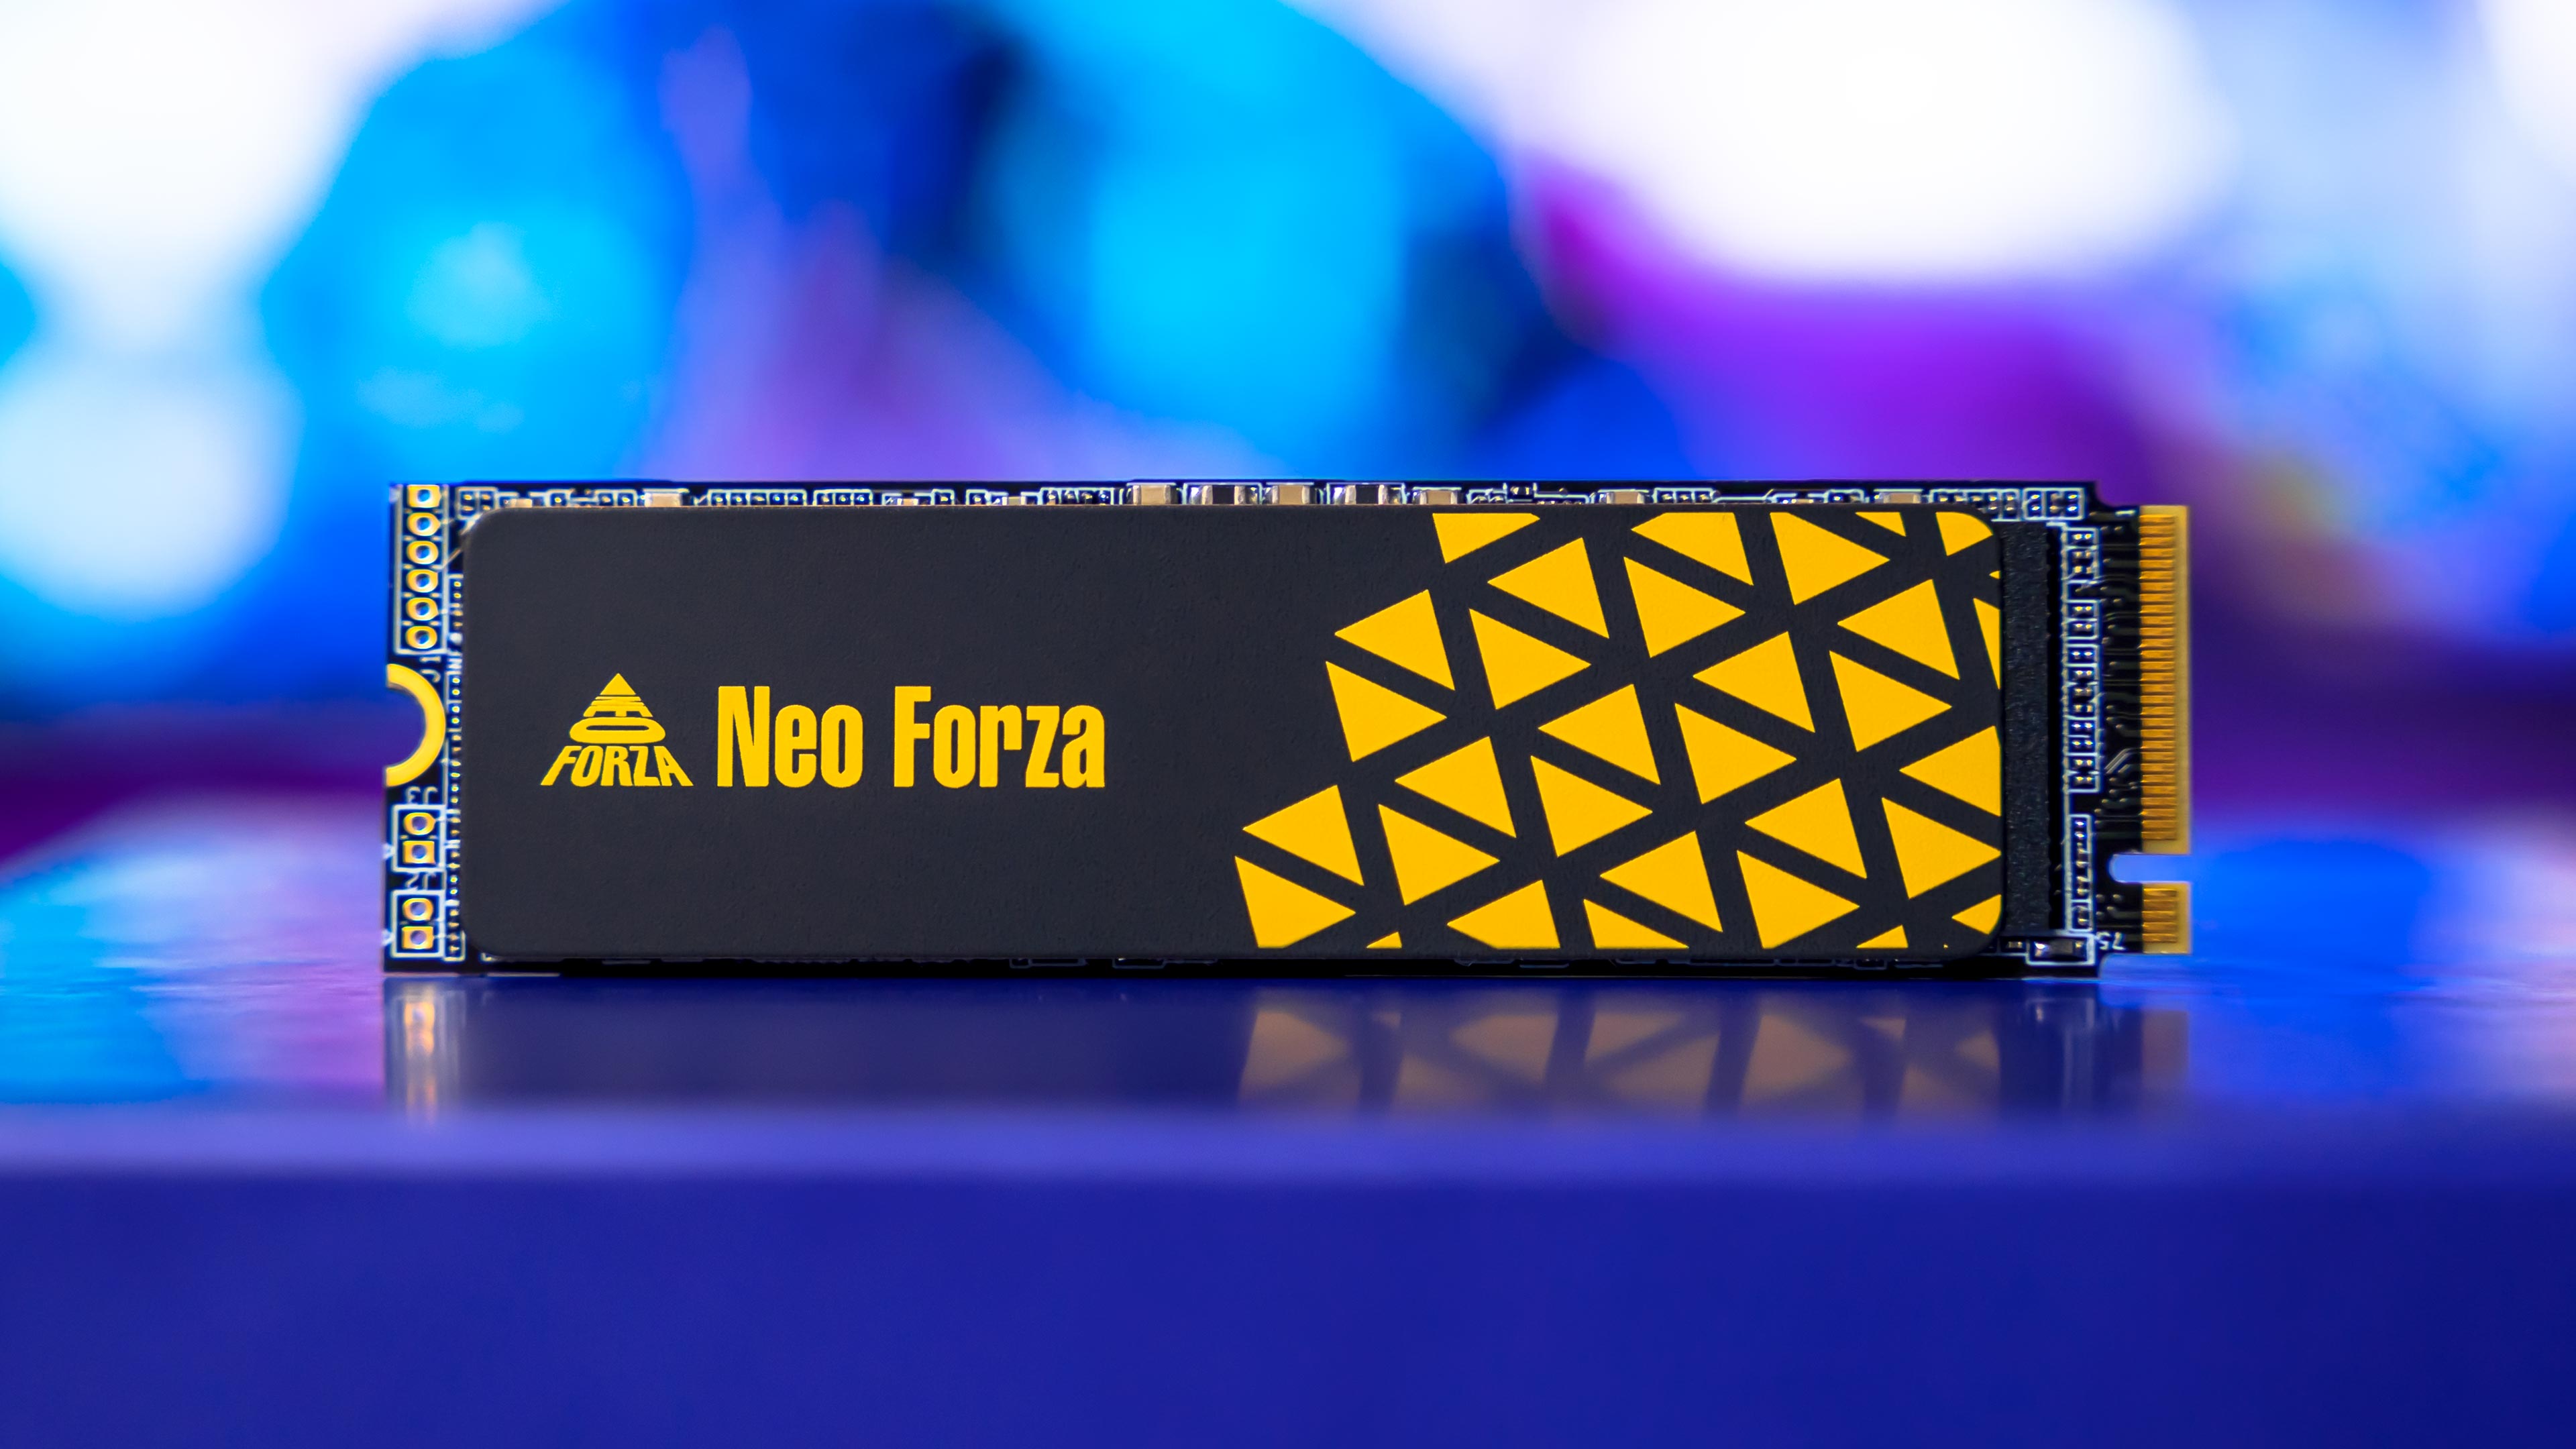 Neo Forza NFP495 4TB SSD M.2 (1)